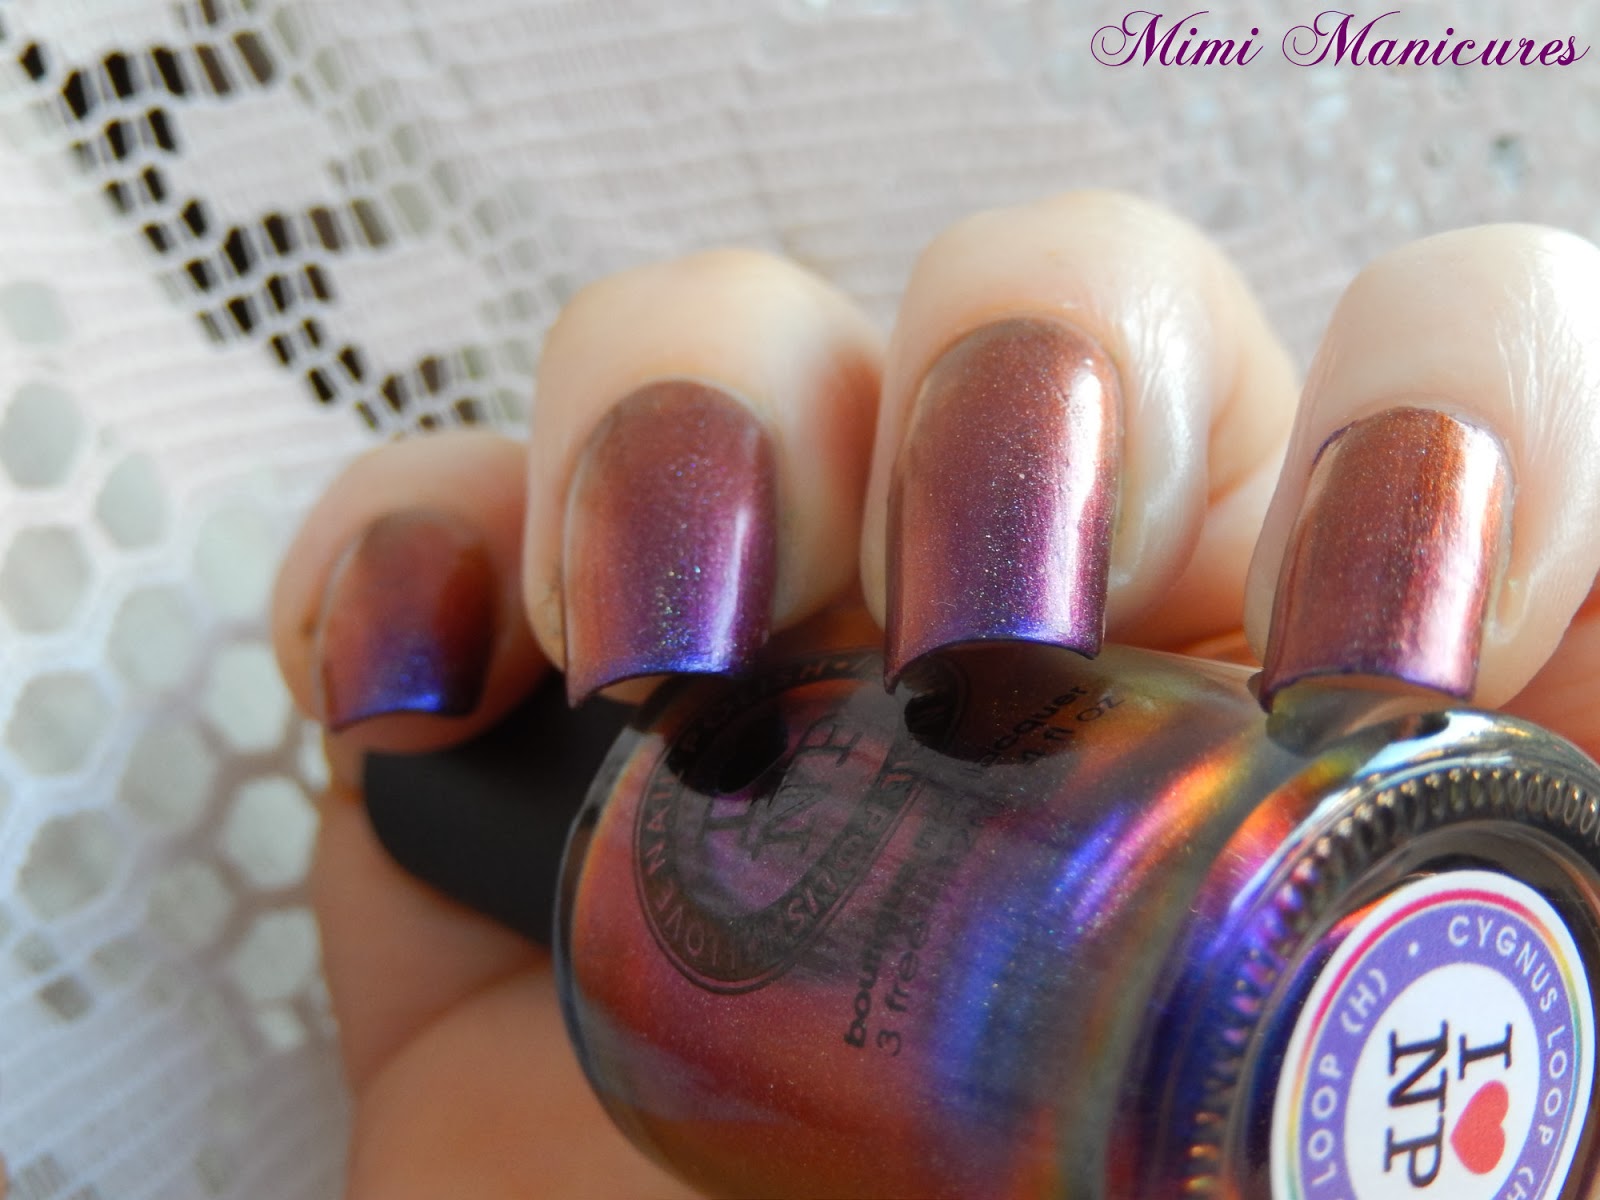 10. "First Love" Nail Polish by Sinful Colors - wide 3